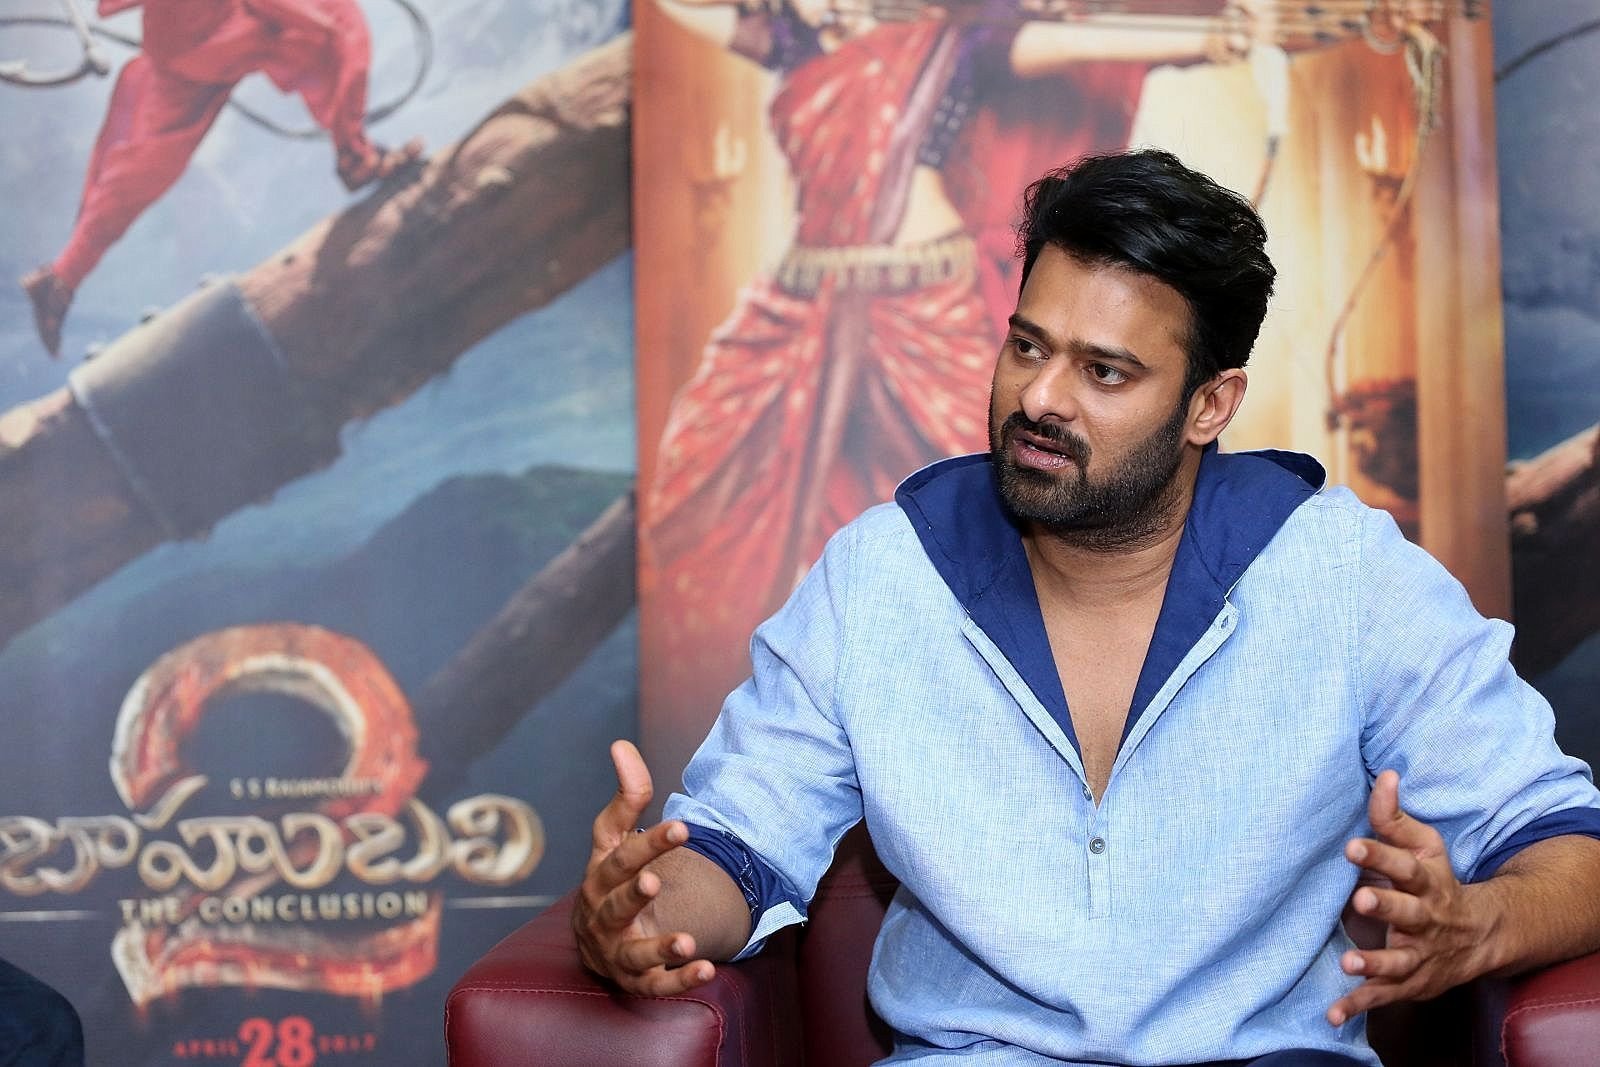 Prabhas Exclusive Interview On Baahubali 2 Photos | Picture 1493569